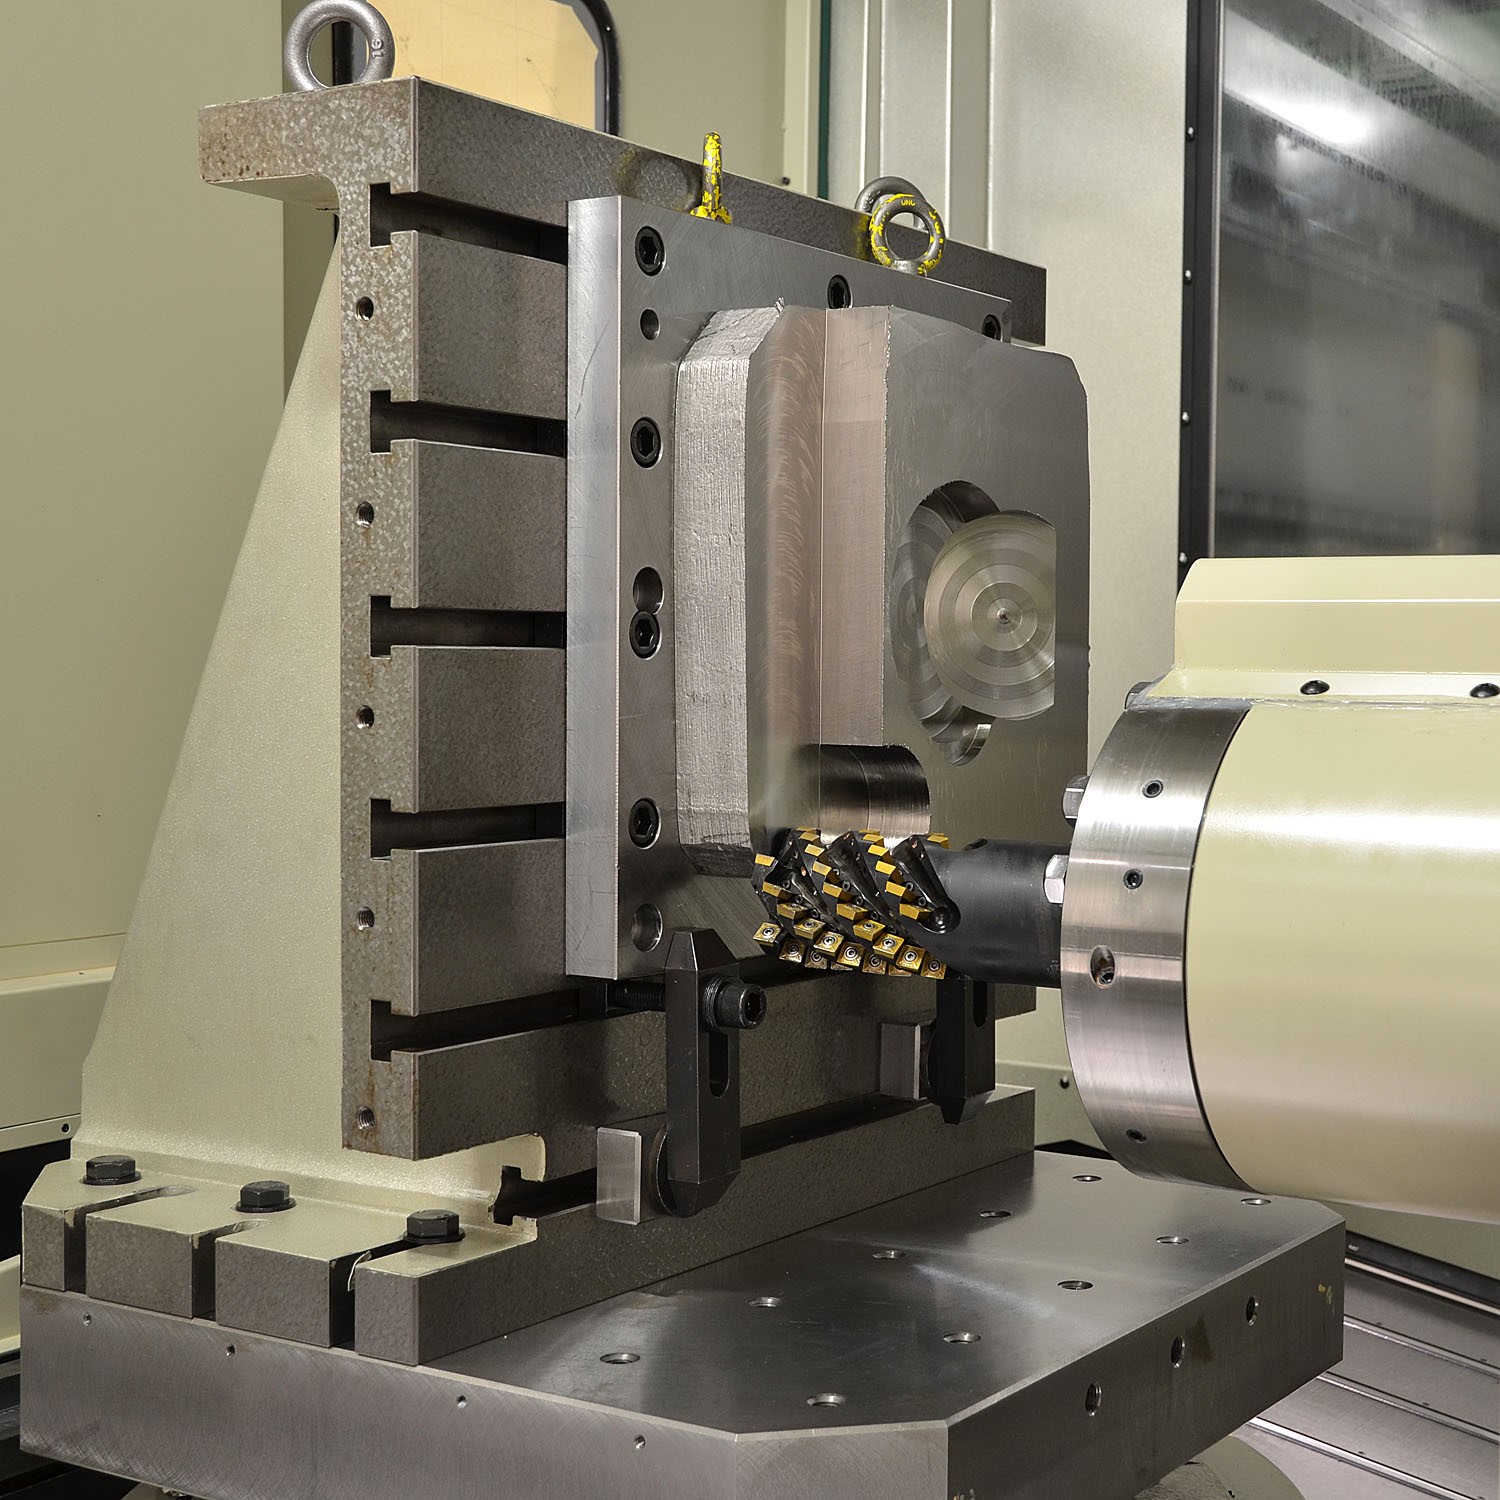 The combination of a rigid machine tool and a strong spindle connection is ideal for cutting titanium. Photo credit: Mitsui Seiki